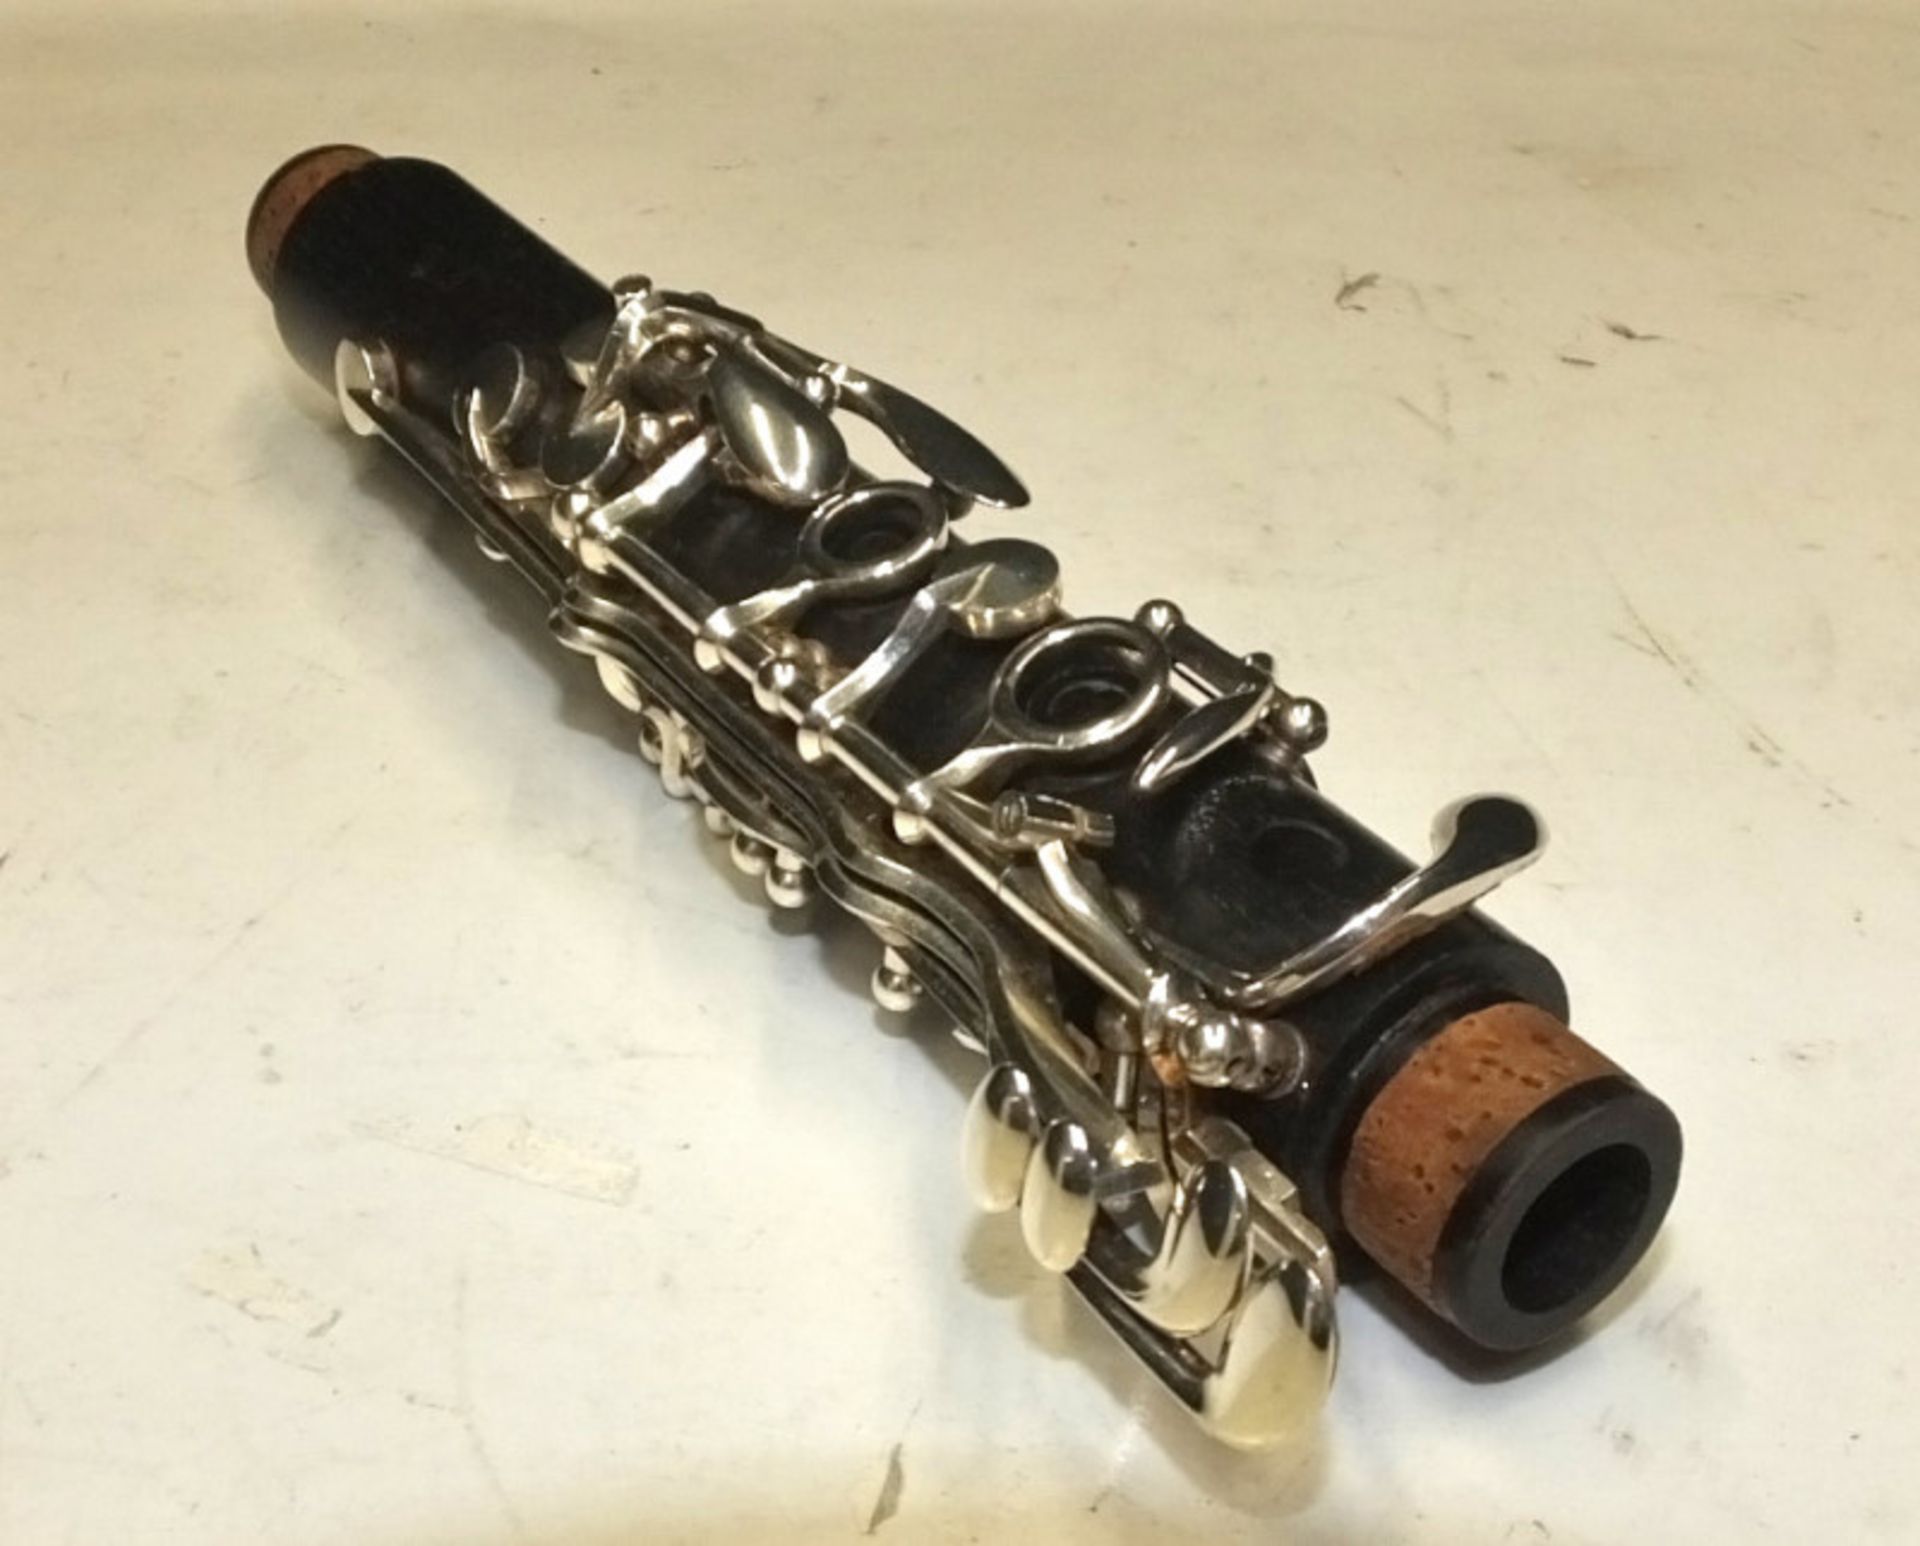 Howarth S2 Clarinet in case - Serial Number - 2153. - Image 3 of 22